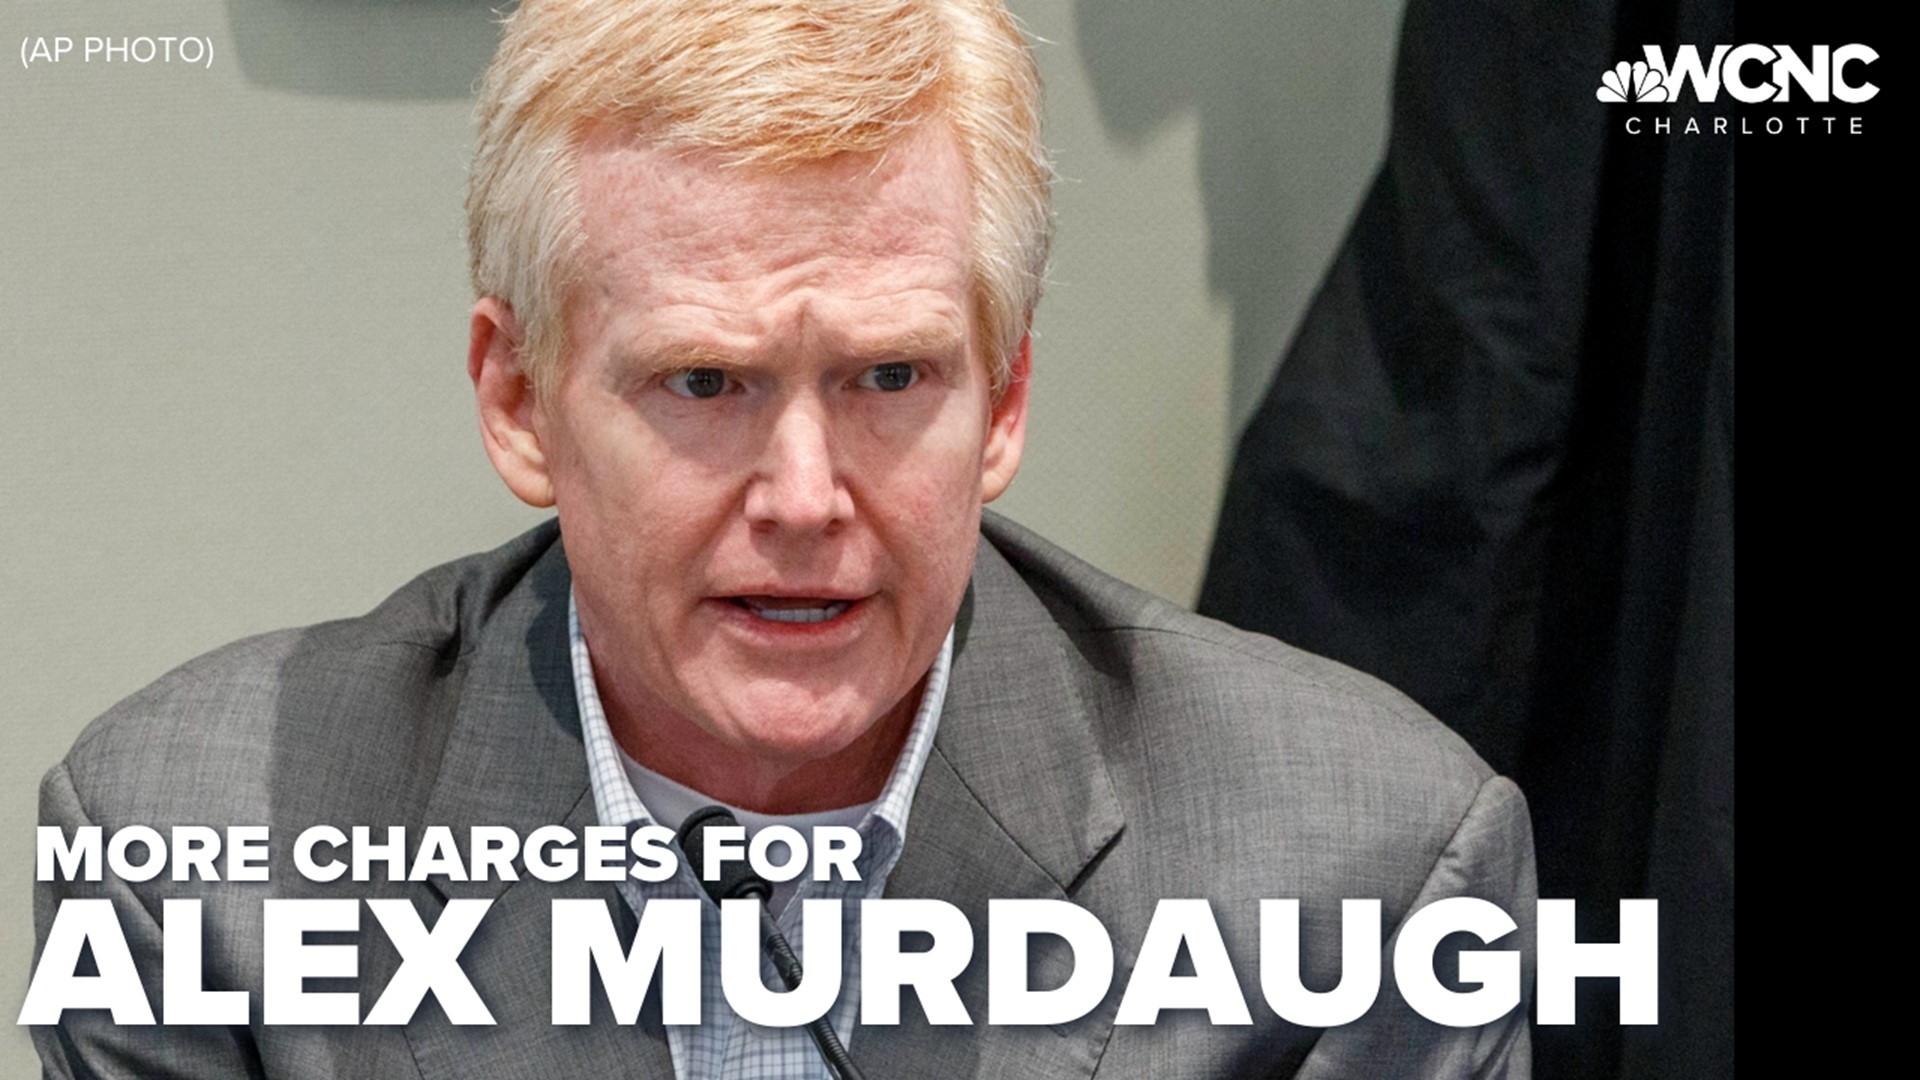 The South Carolina attorney general's office says it is going after convicted murderer Alex Murdaugh on new charges of tax evasion.